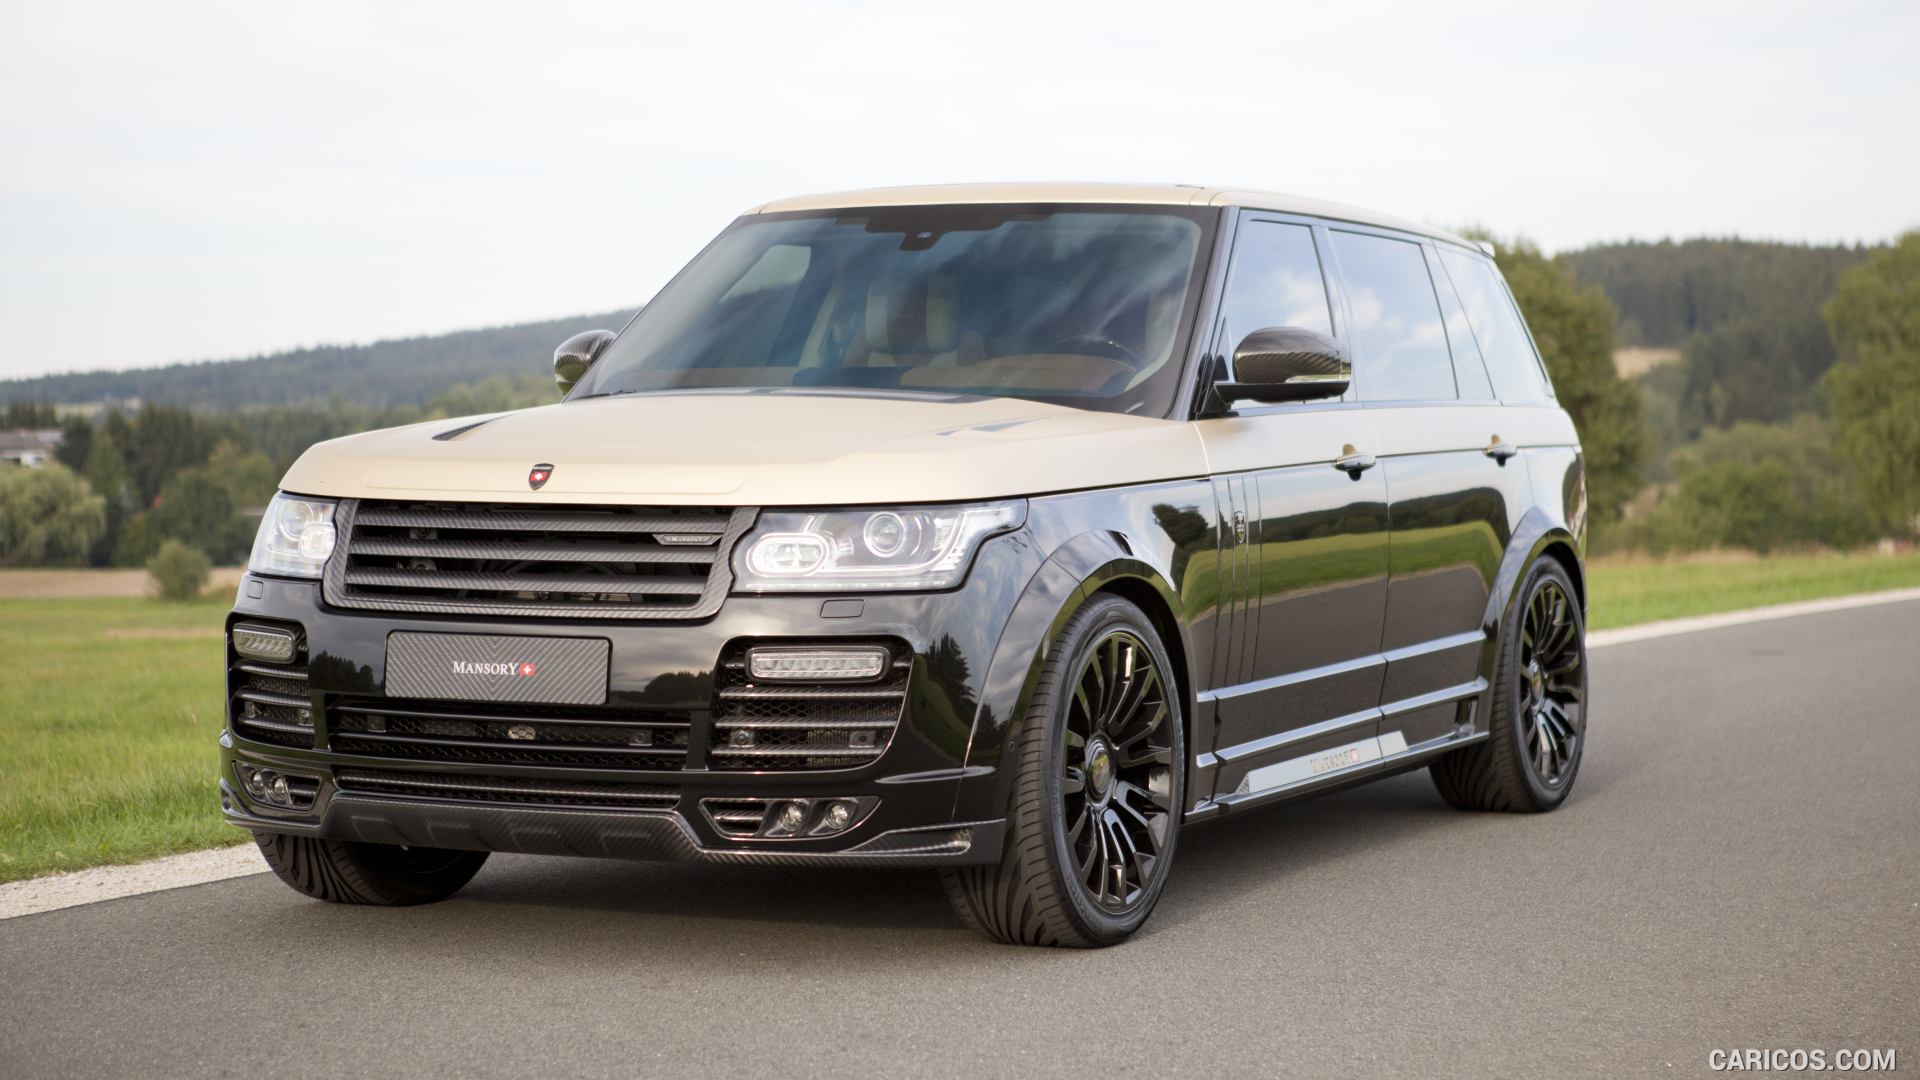 2016 MANSORY Range Rover Autobiography Extended